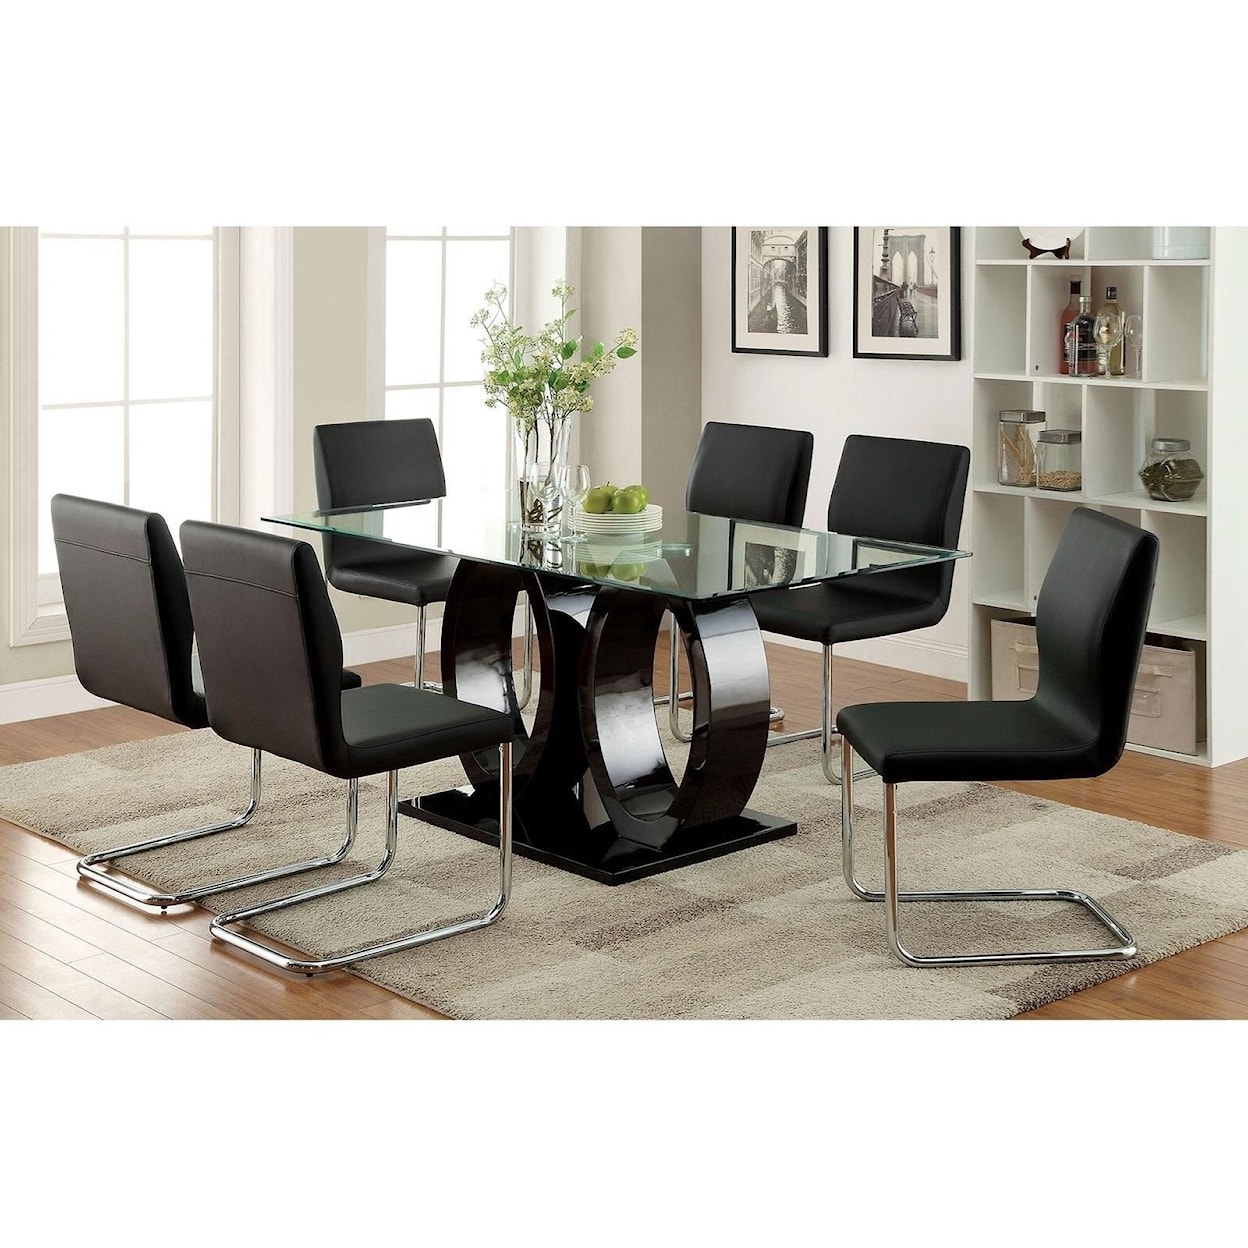 Furniture of America Lodia I Table and 6 Side Chairs